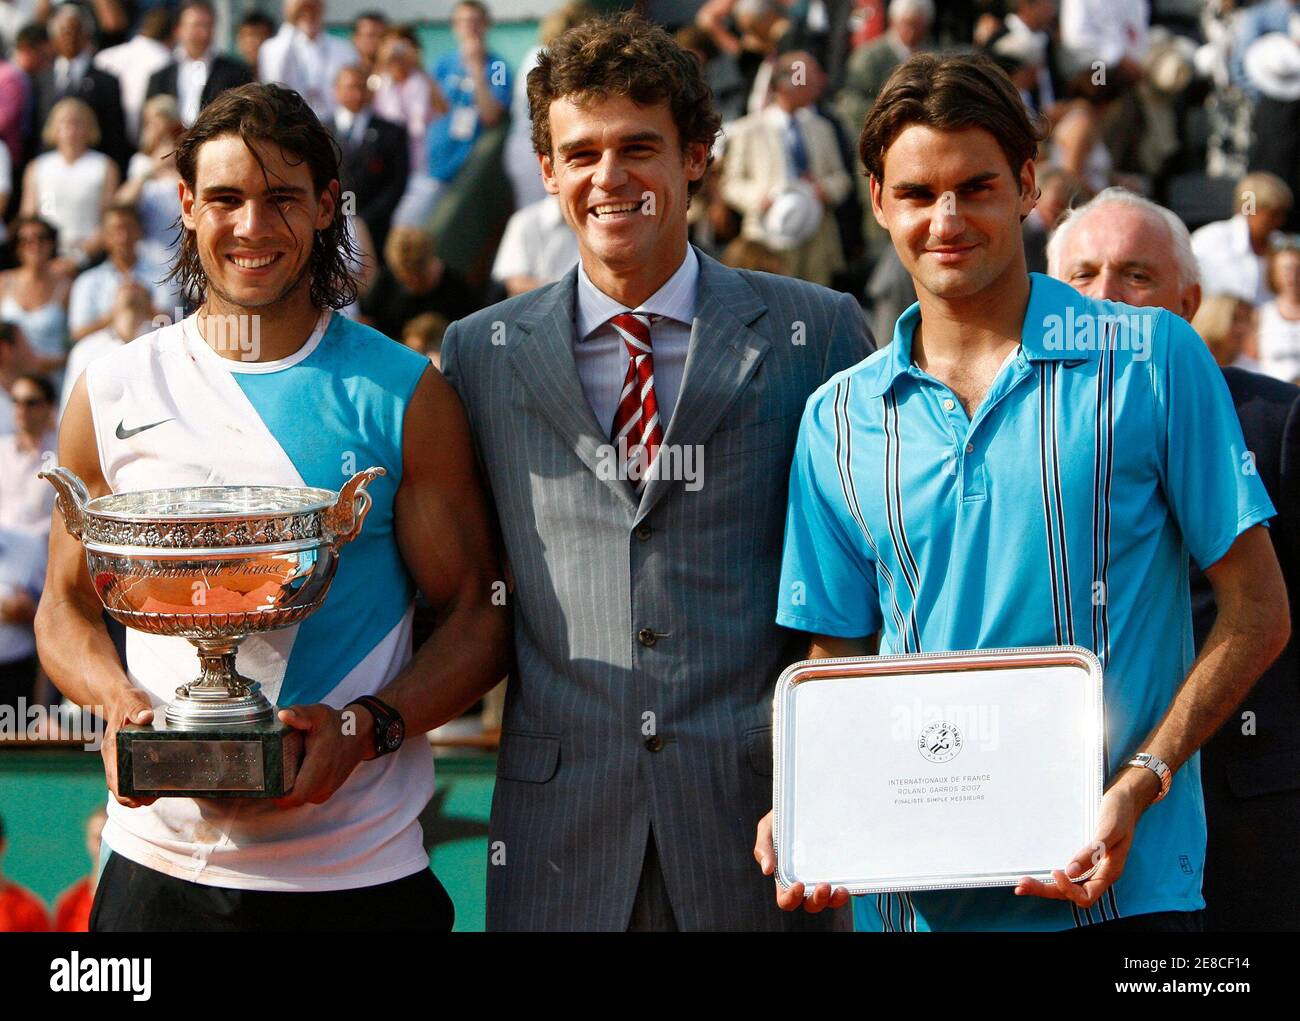 Spain's Rafael Nadal (L) stands with Brazilian player Gustavo Kuerten (C)  and Switzerland's Roger Federer after winning the men's final match at the  French Open tennis tournament at Roland Garros in Paris